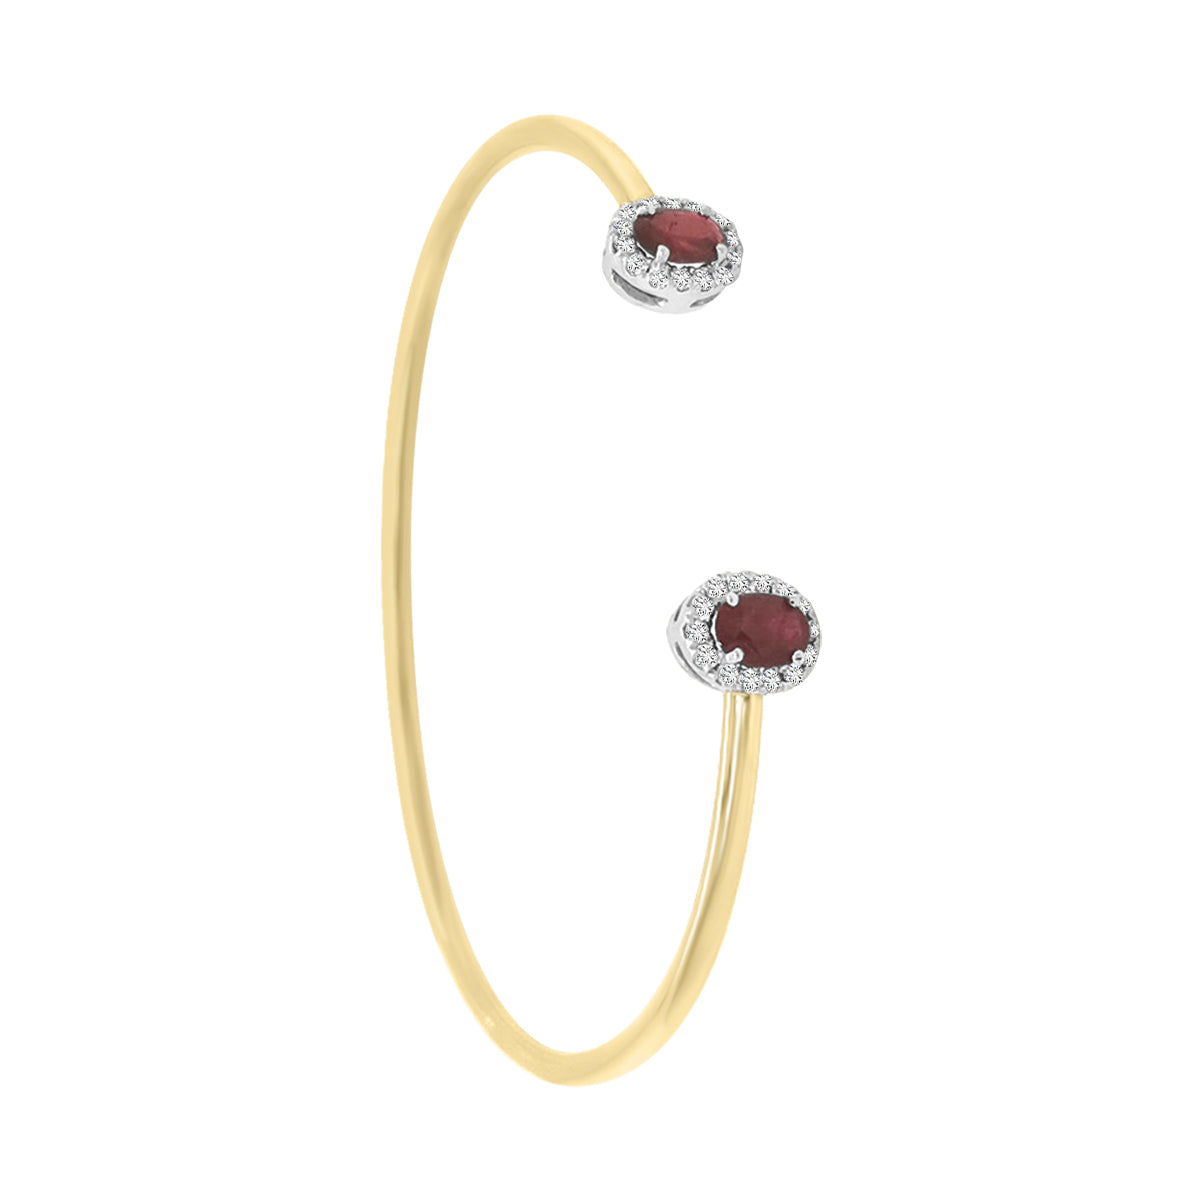 Ruby And Diamond Open Cuff Bangle In 18k Rose Gold.